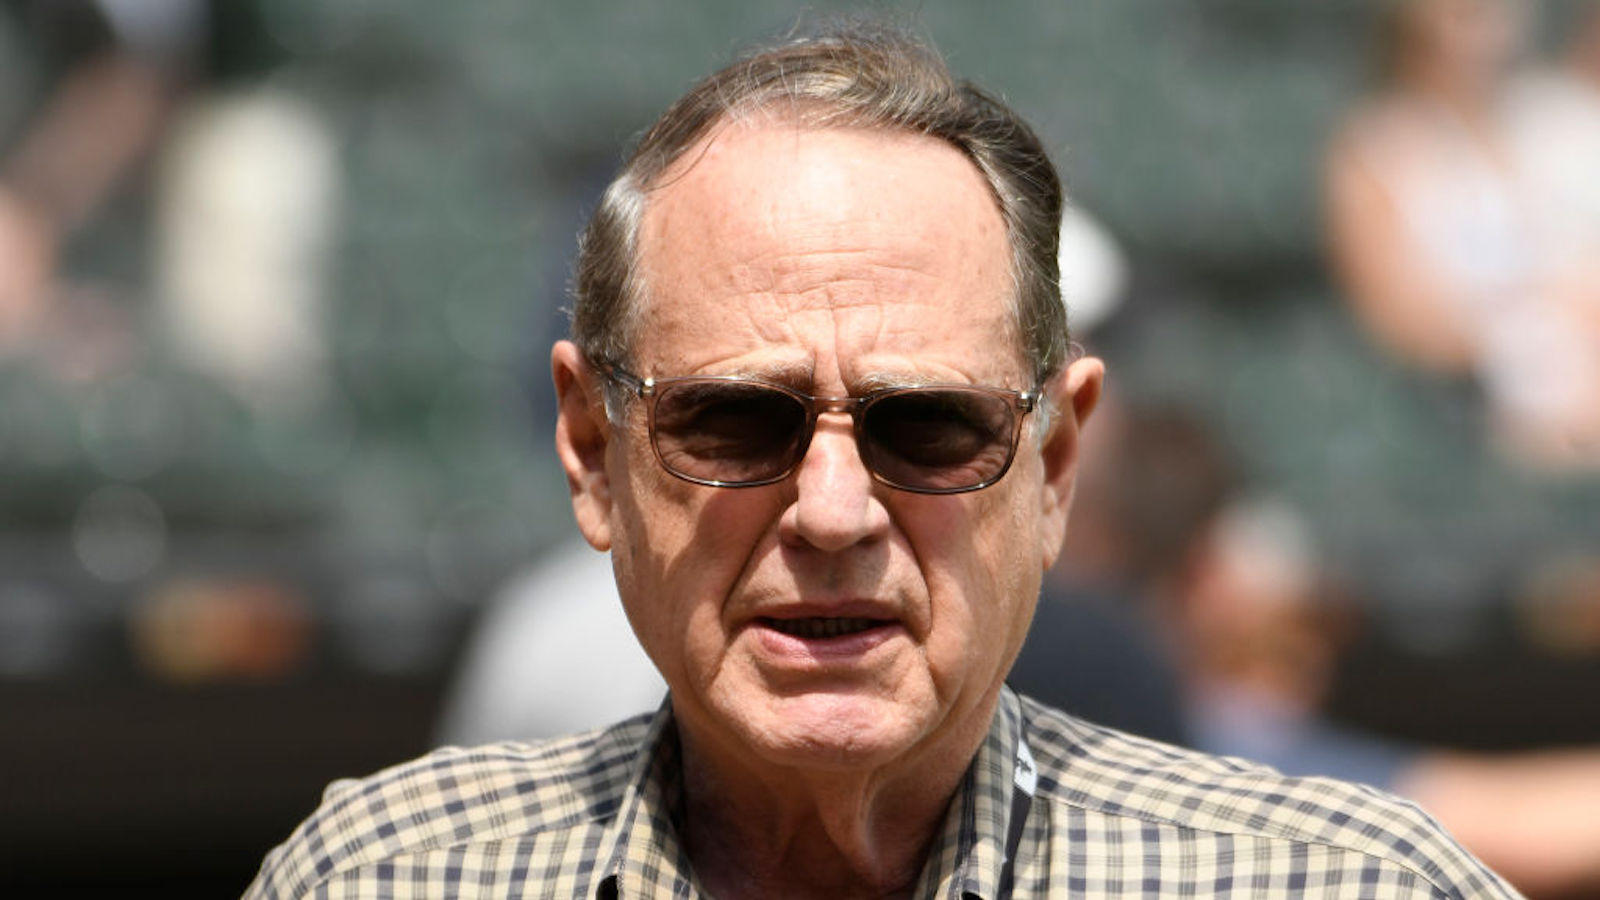 Jerry Reinsdorf Chairman of the Chicago White Sox on the field before the game between the Chicago White Sox and the Minnesota Twins at Guaranteed Rate Field on June 29, 2019 in Chicago, Illinois.